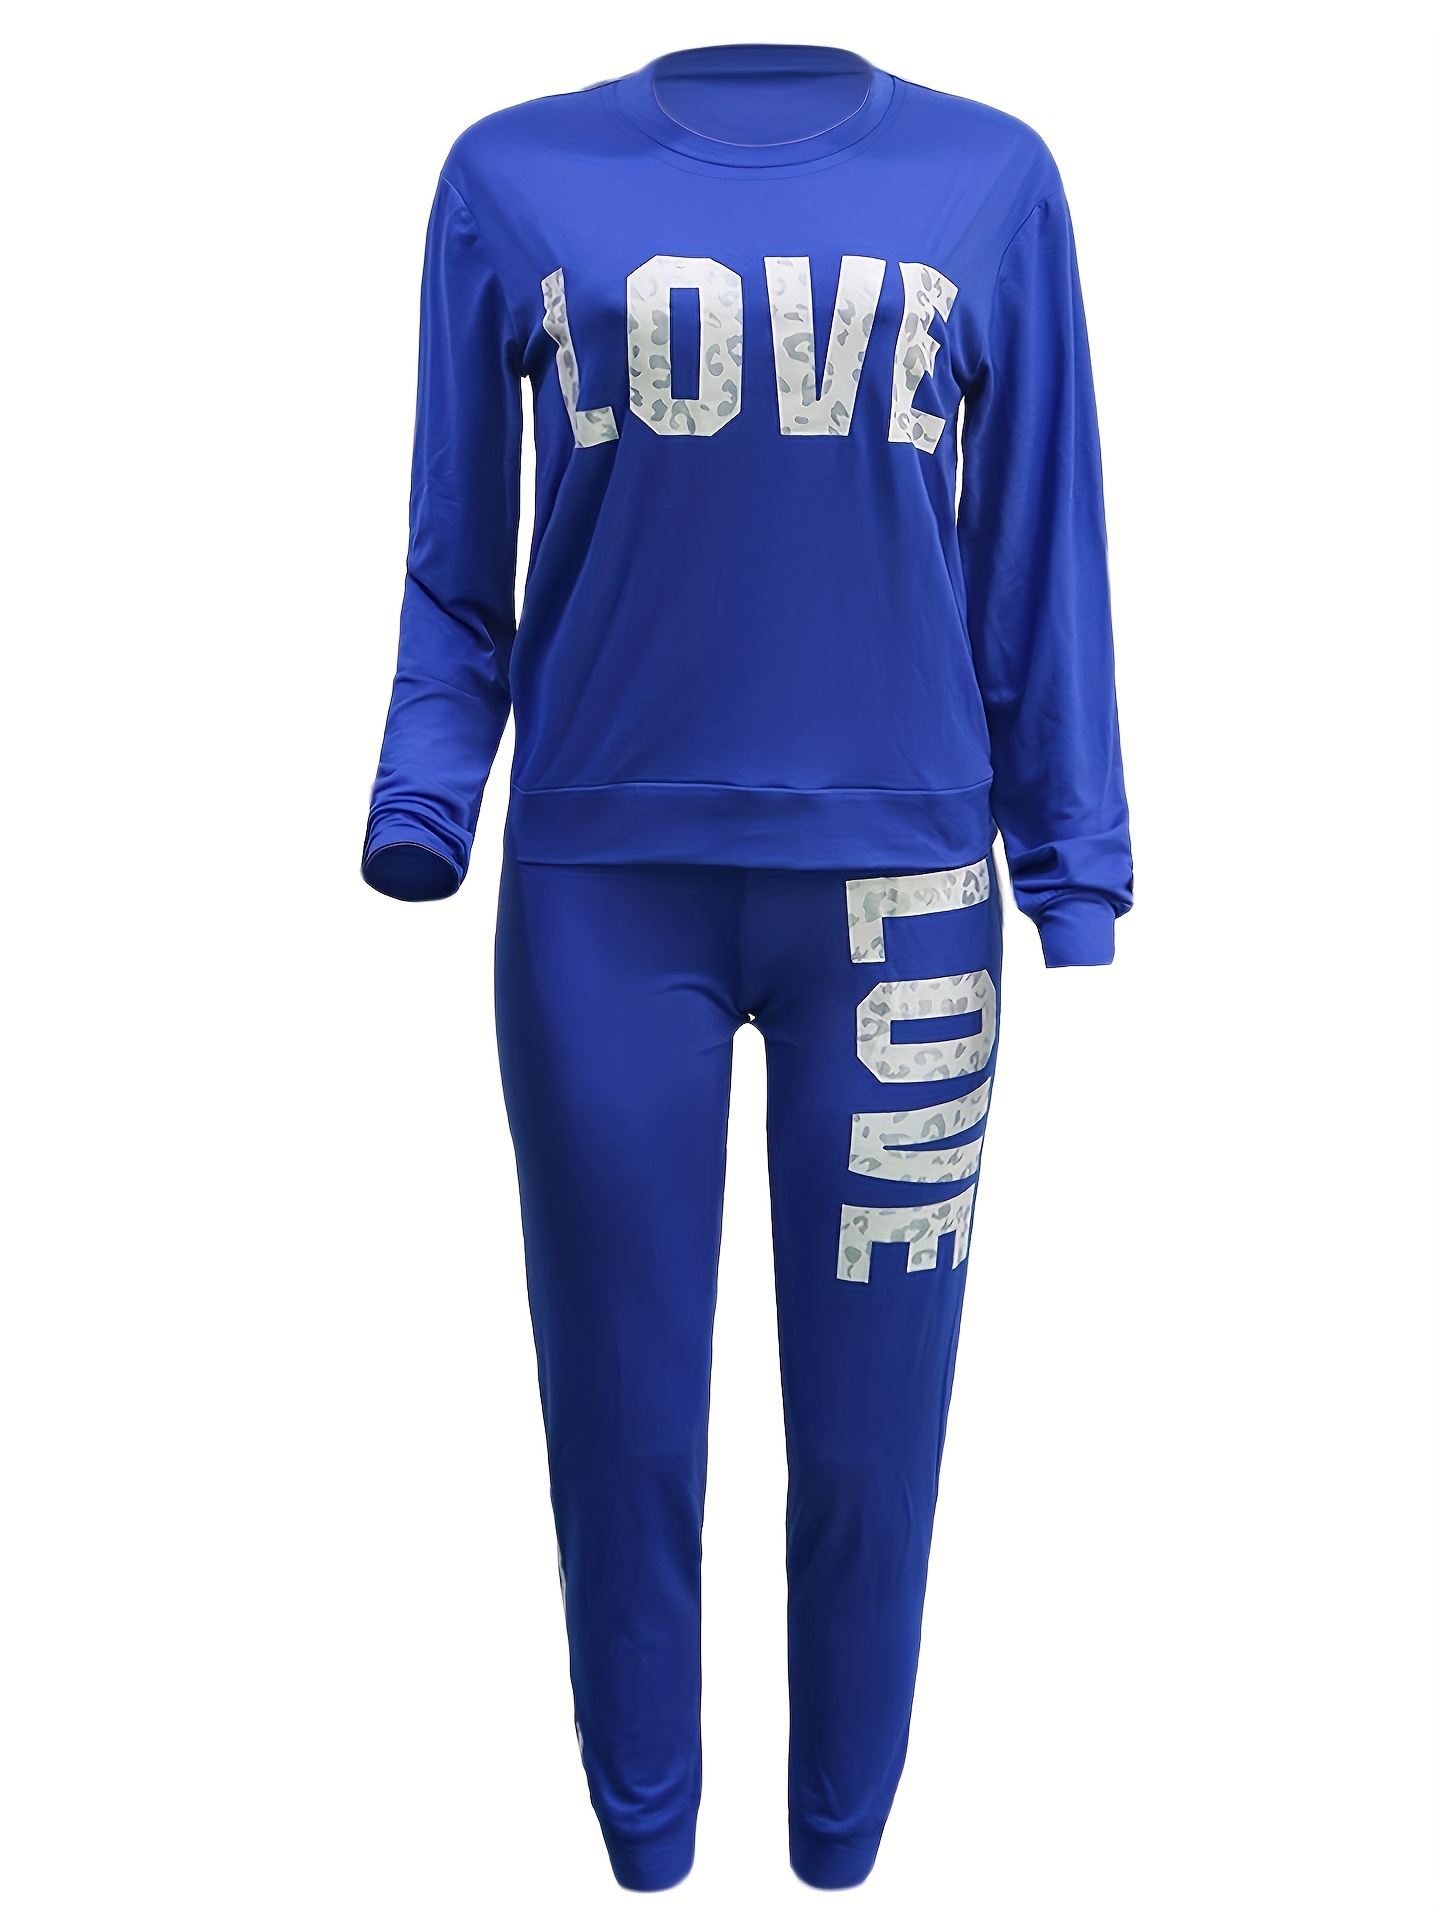 Victoria's Secret Long Sleeve Athletic T-Shirts for Women